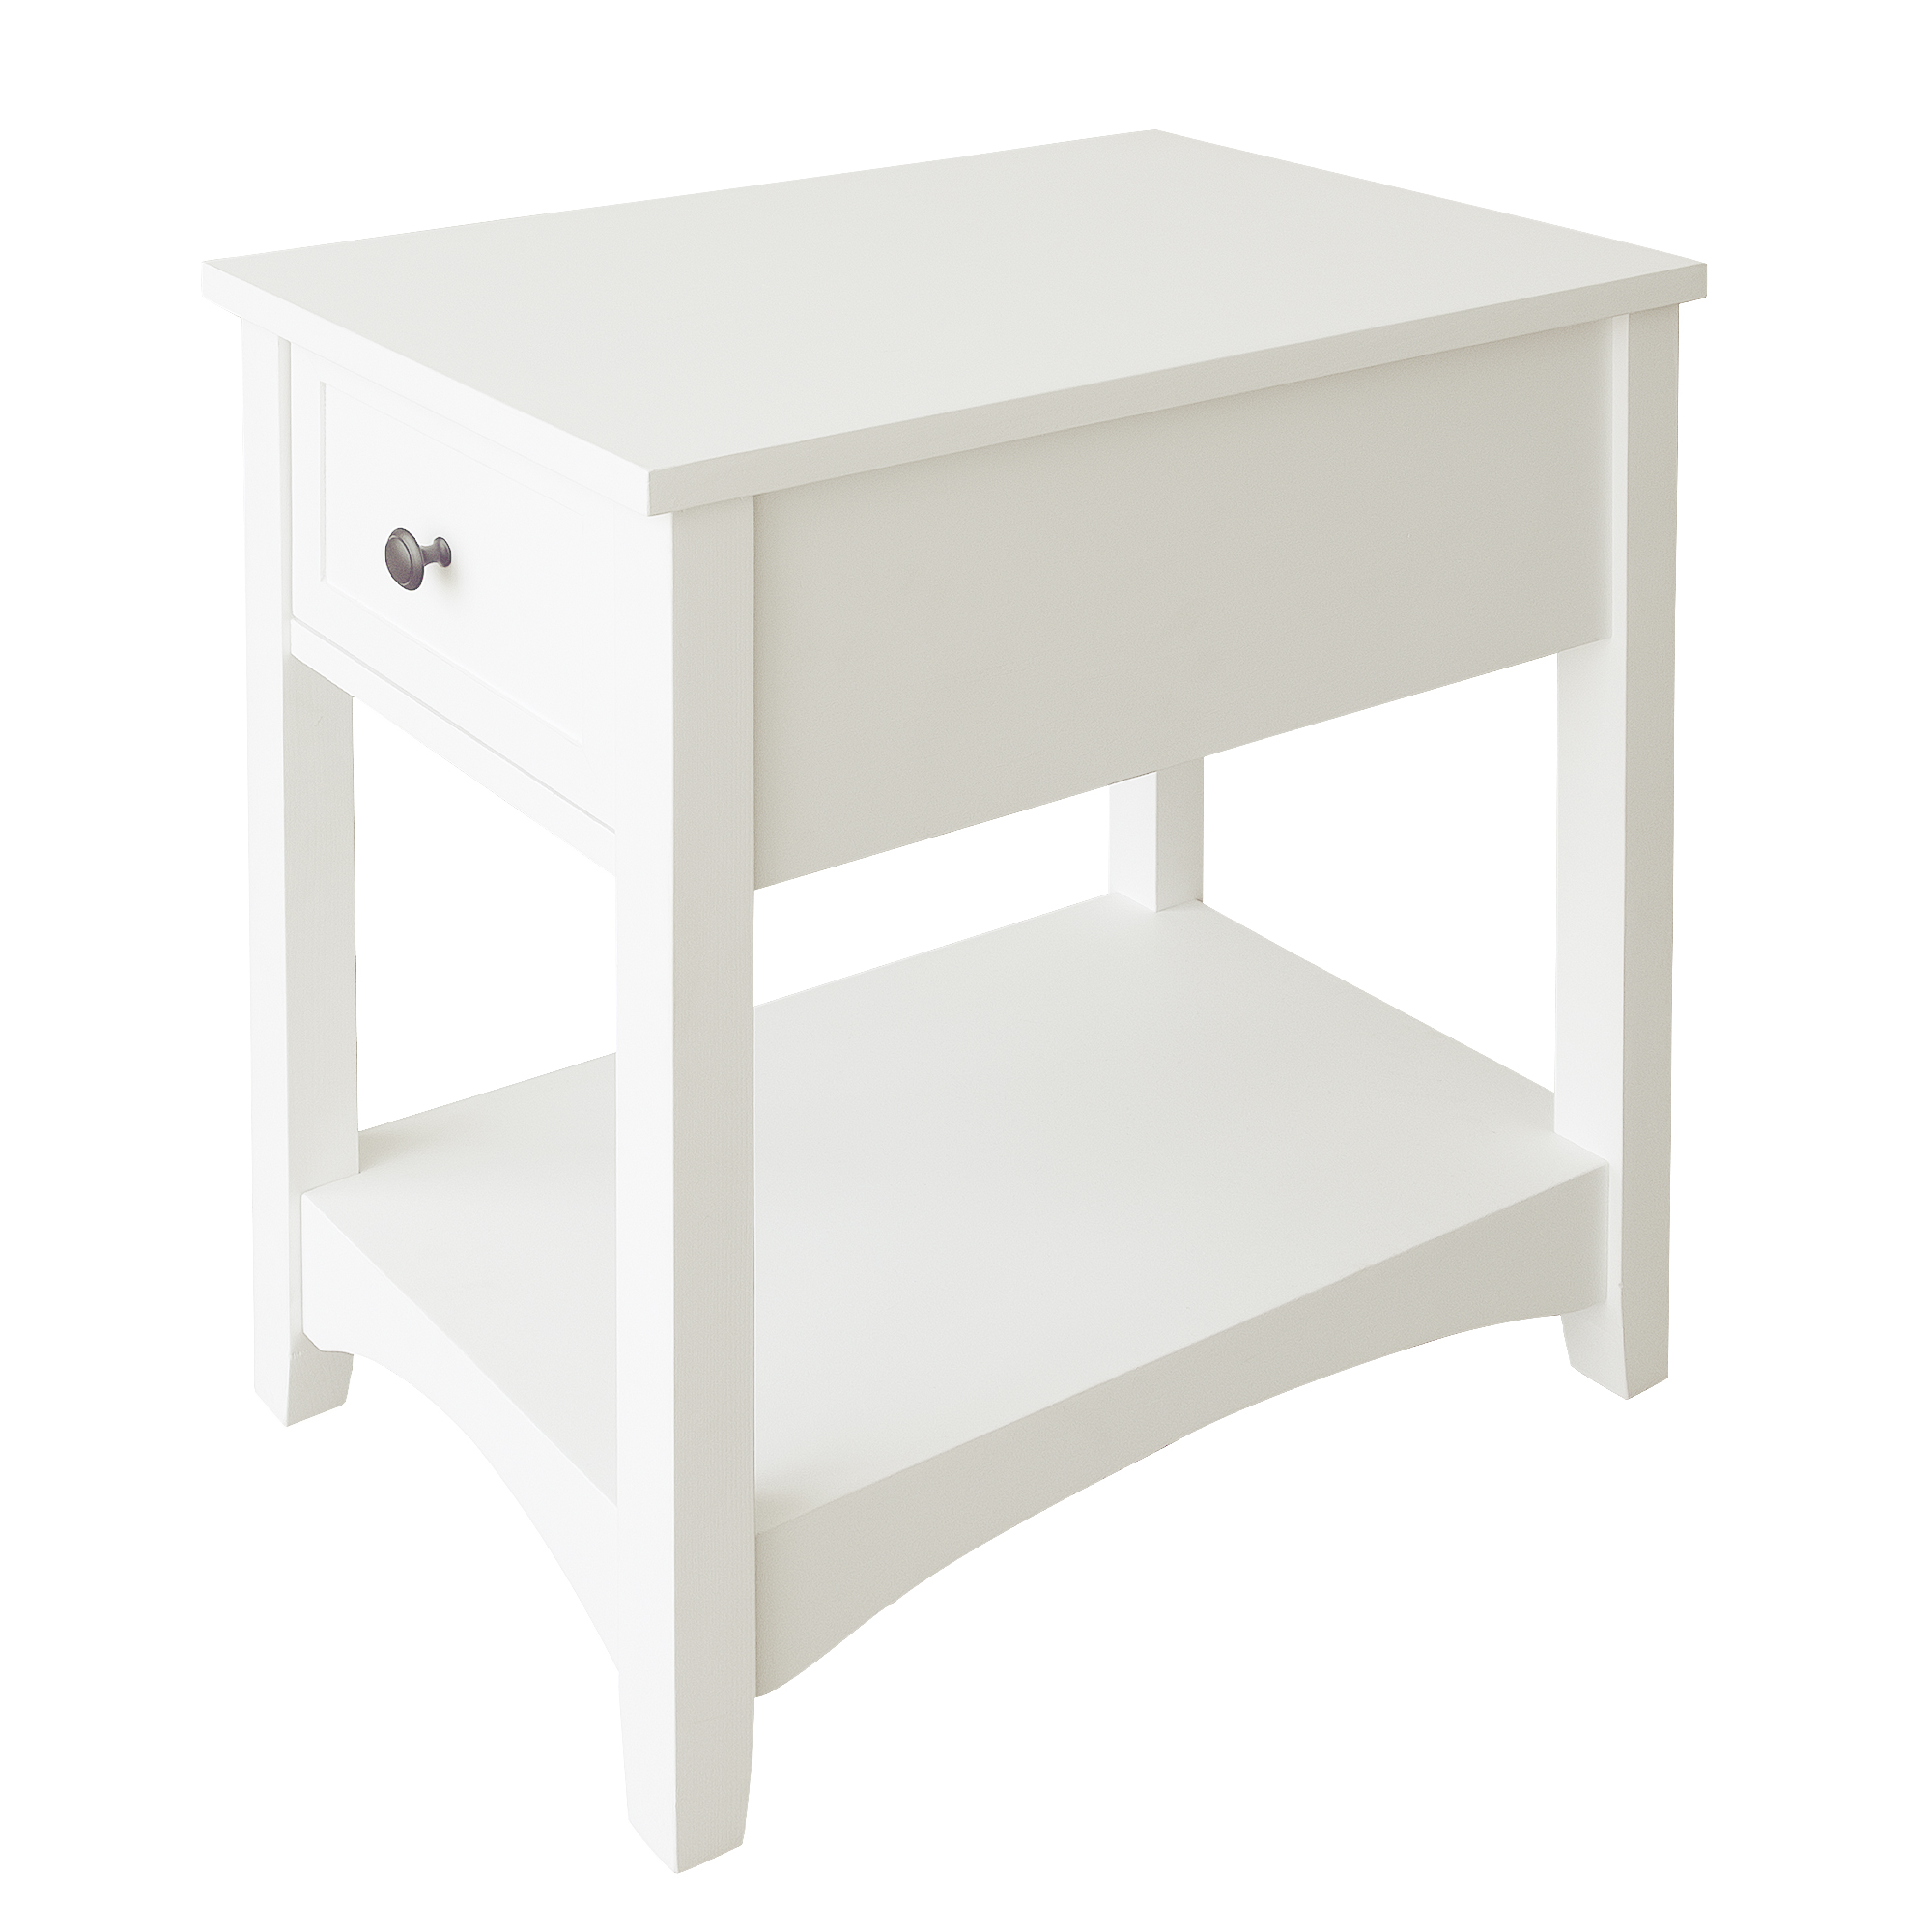 2-Tier Side End Table with Storage Shelf and Drawer, Narrow Nightstand for Living Room Bedroom Small Spaces, Solid Wood Legs, Ivory White-Boyel Living